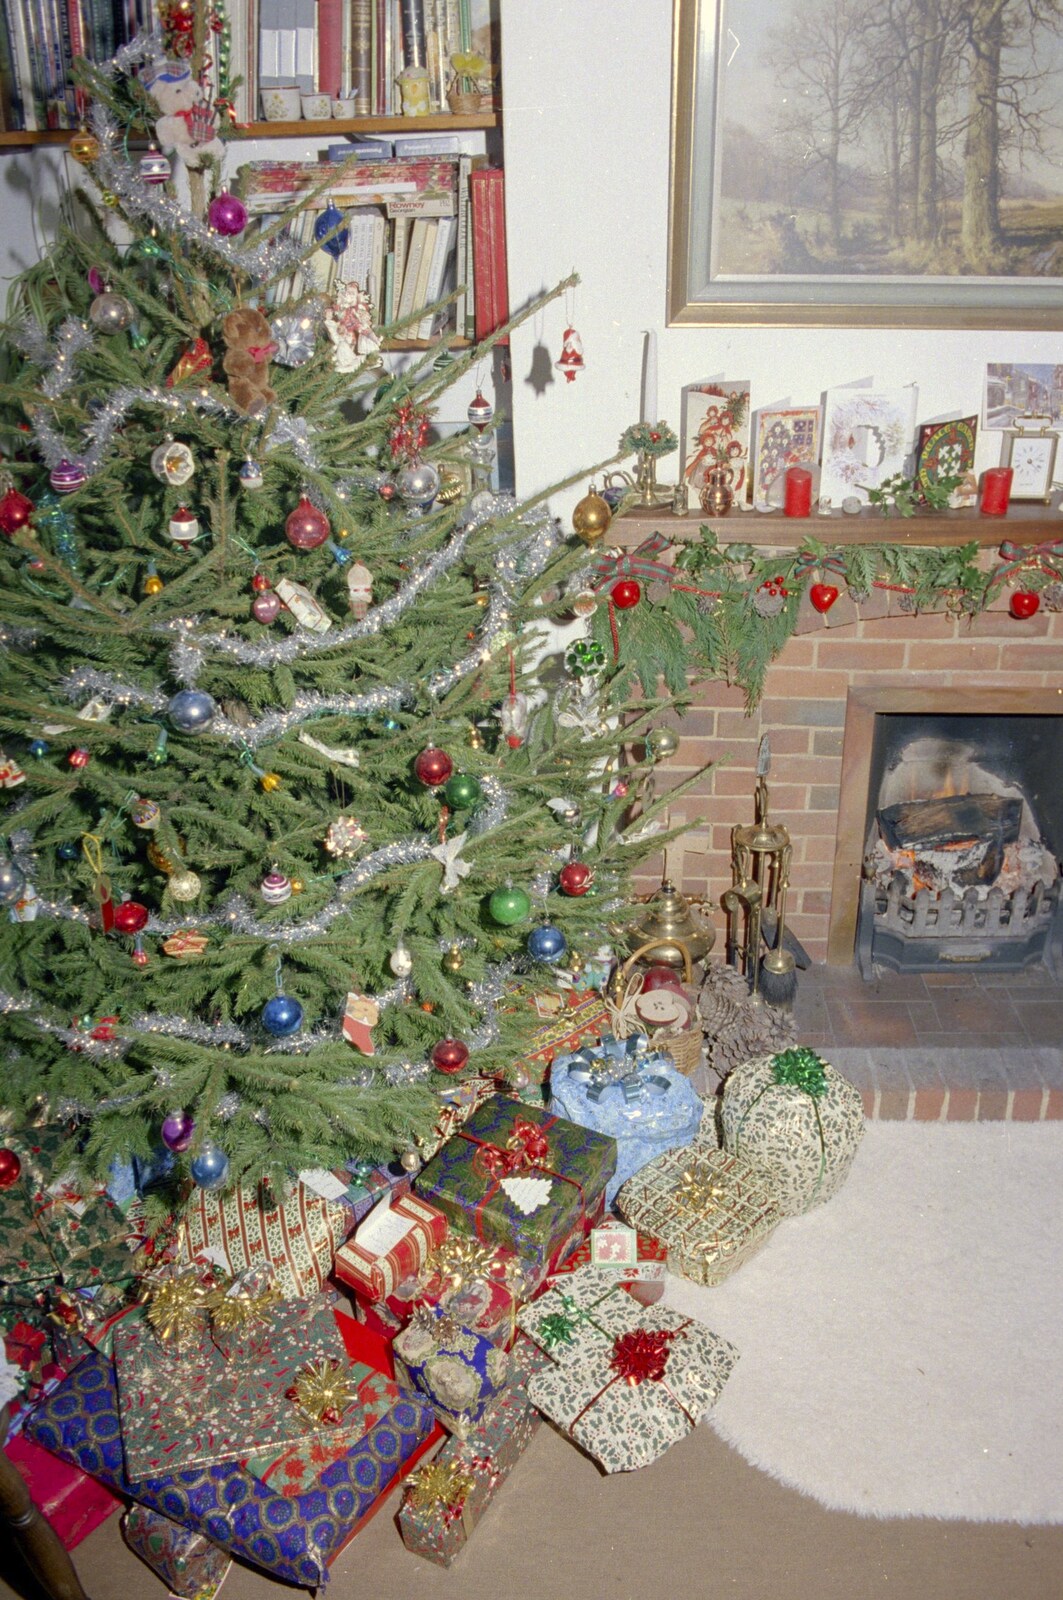 The Christmas tree from Christmas Down South, Burton and Walkford, Dorset - 25th December 1994